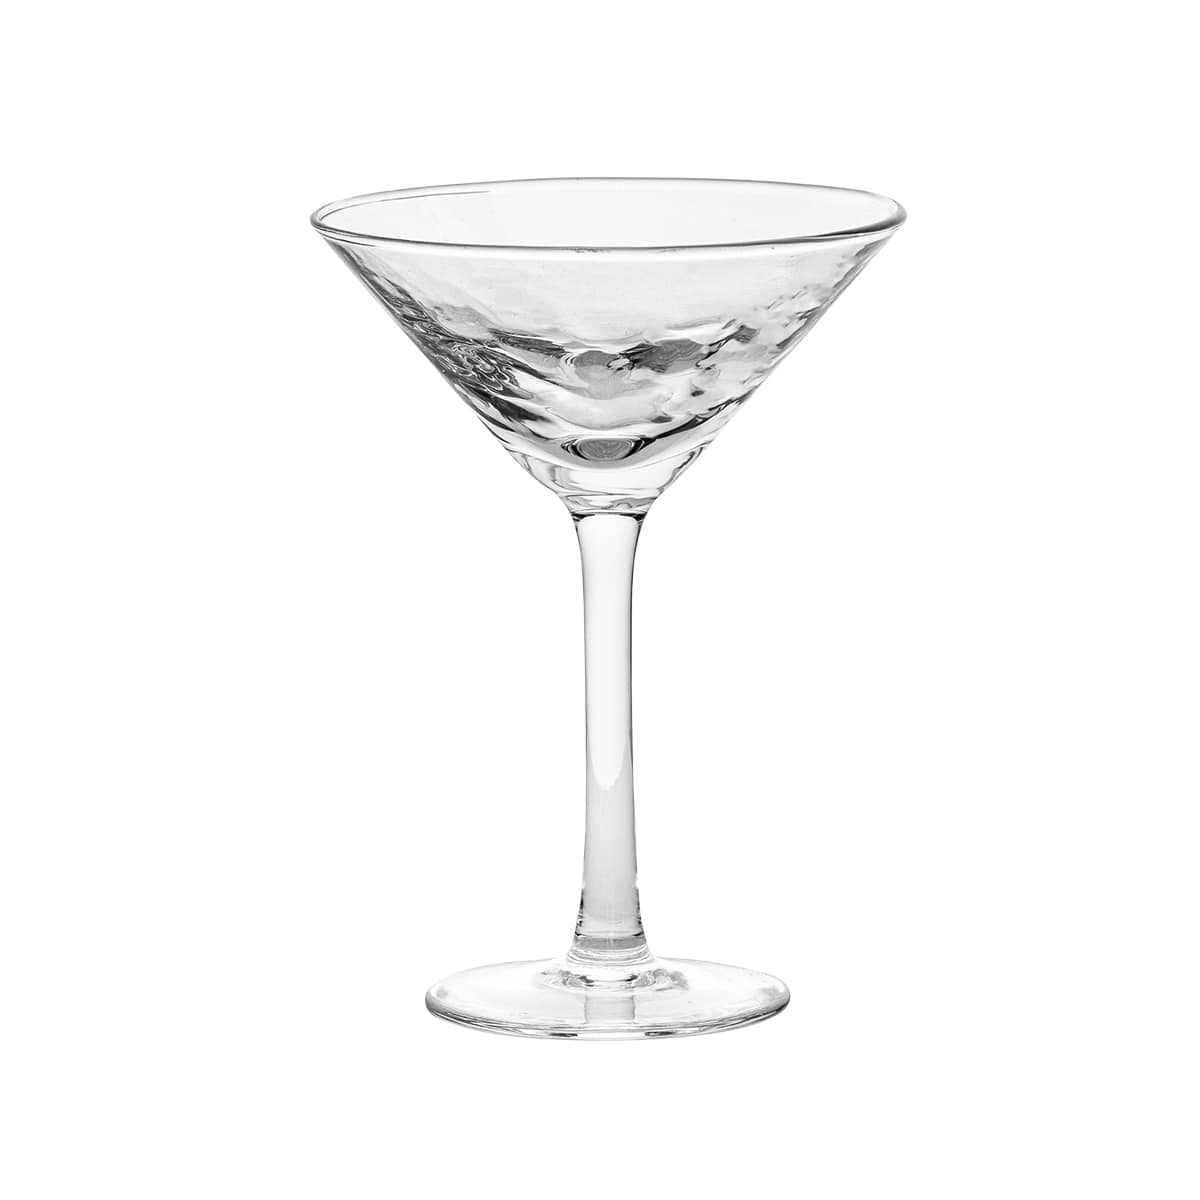 Subtly shimmering and textural, this satisfyingly sturdy mouth-blown glass will inspire your inner Bond...shaken not stirred.